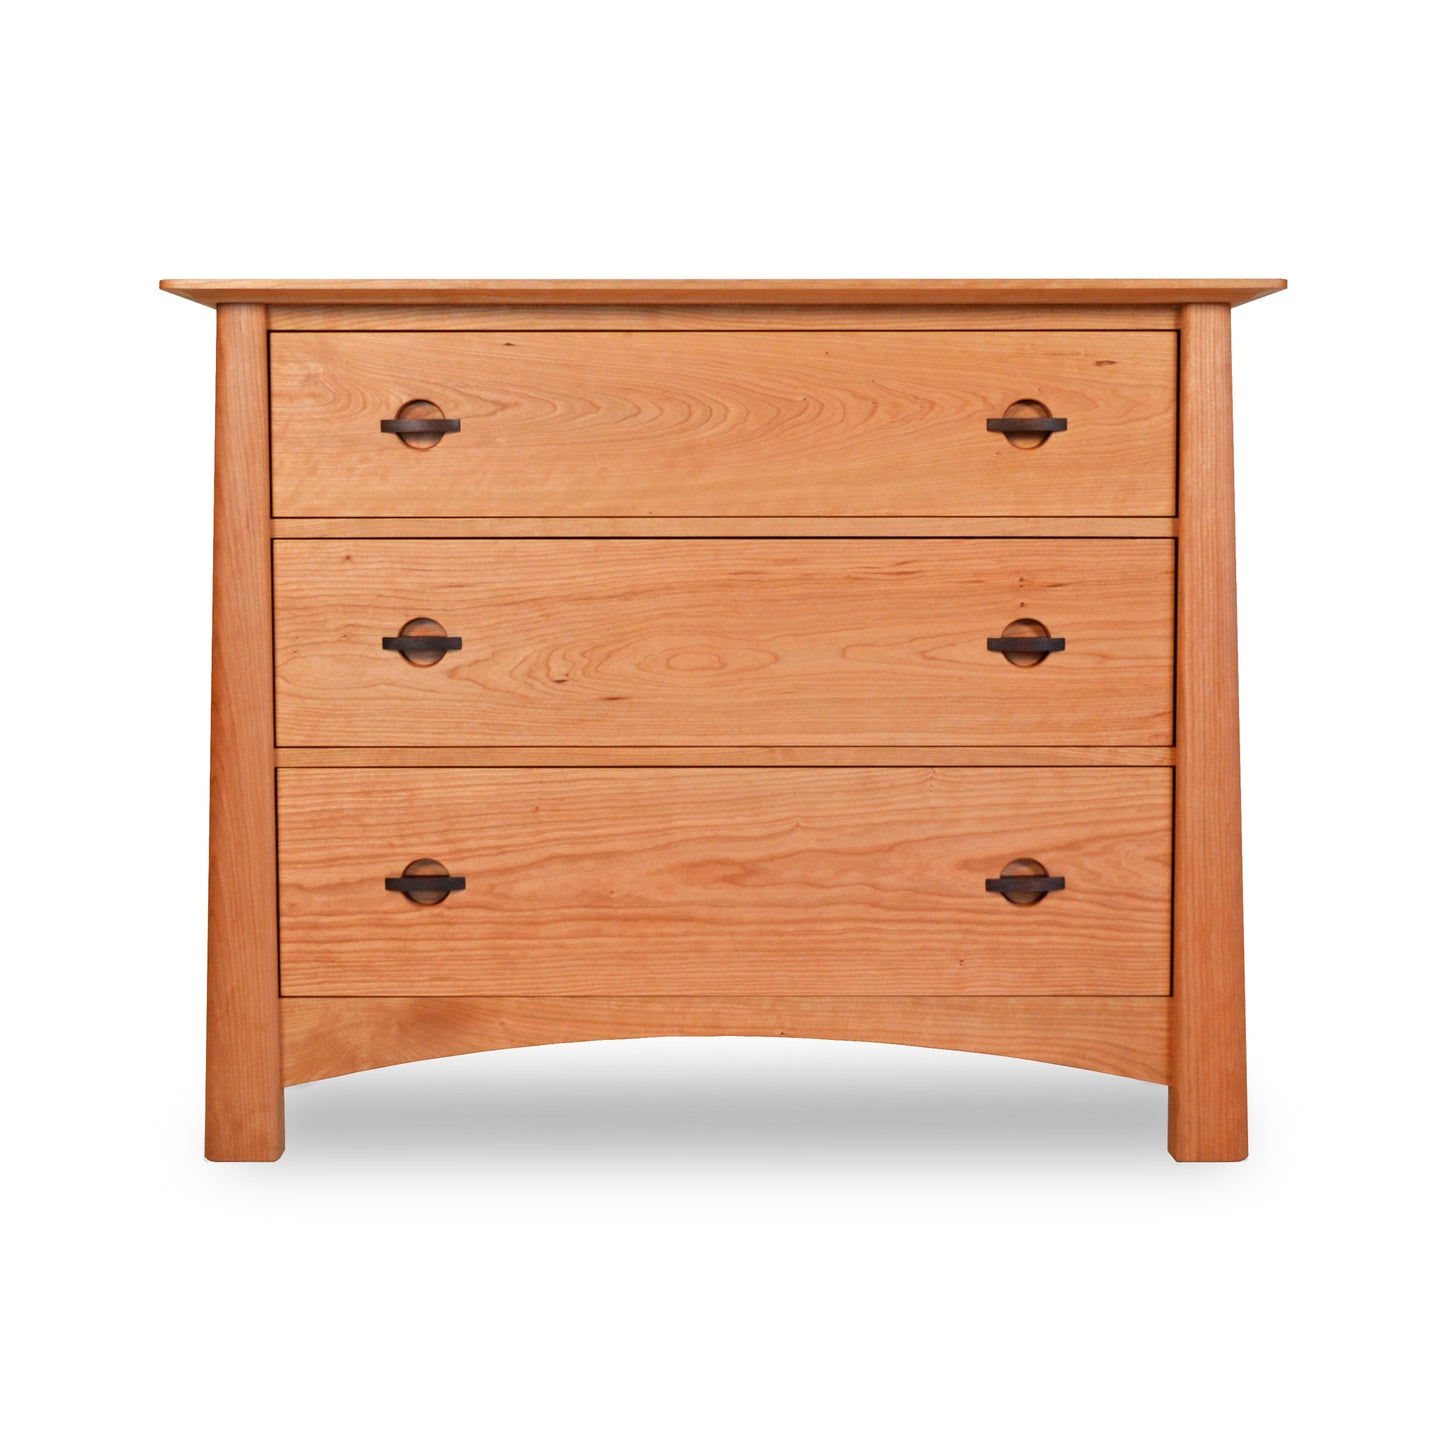 A wooden Maple Corner Woodworks Cherry Moon 3-Drawer Chest with round metal handles, featuring smooth finish and a slightly curved base, isolated on a white background.